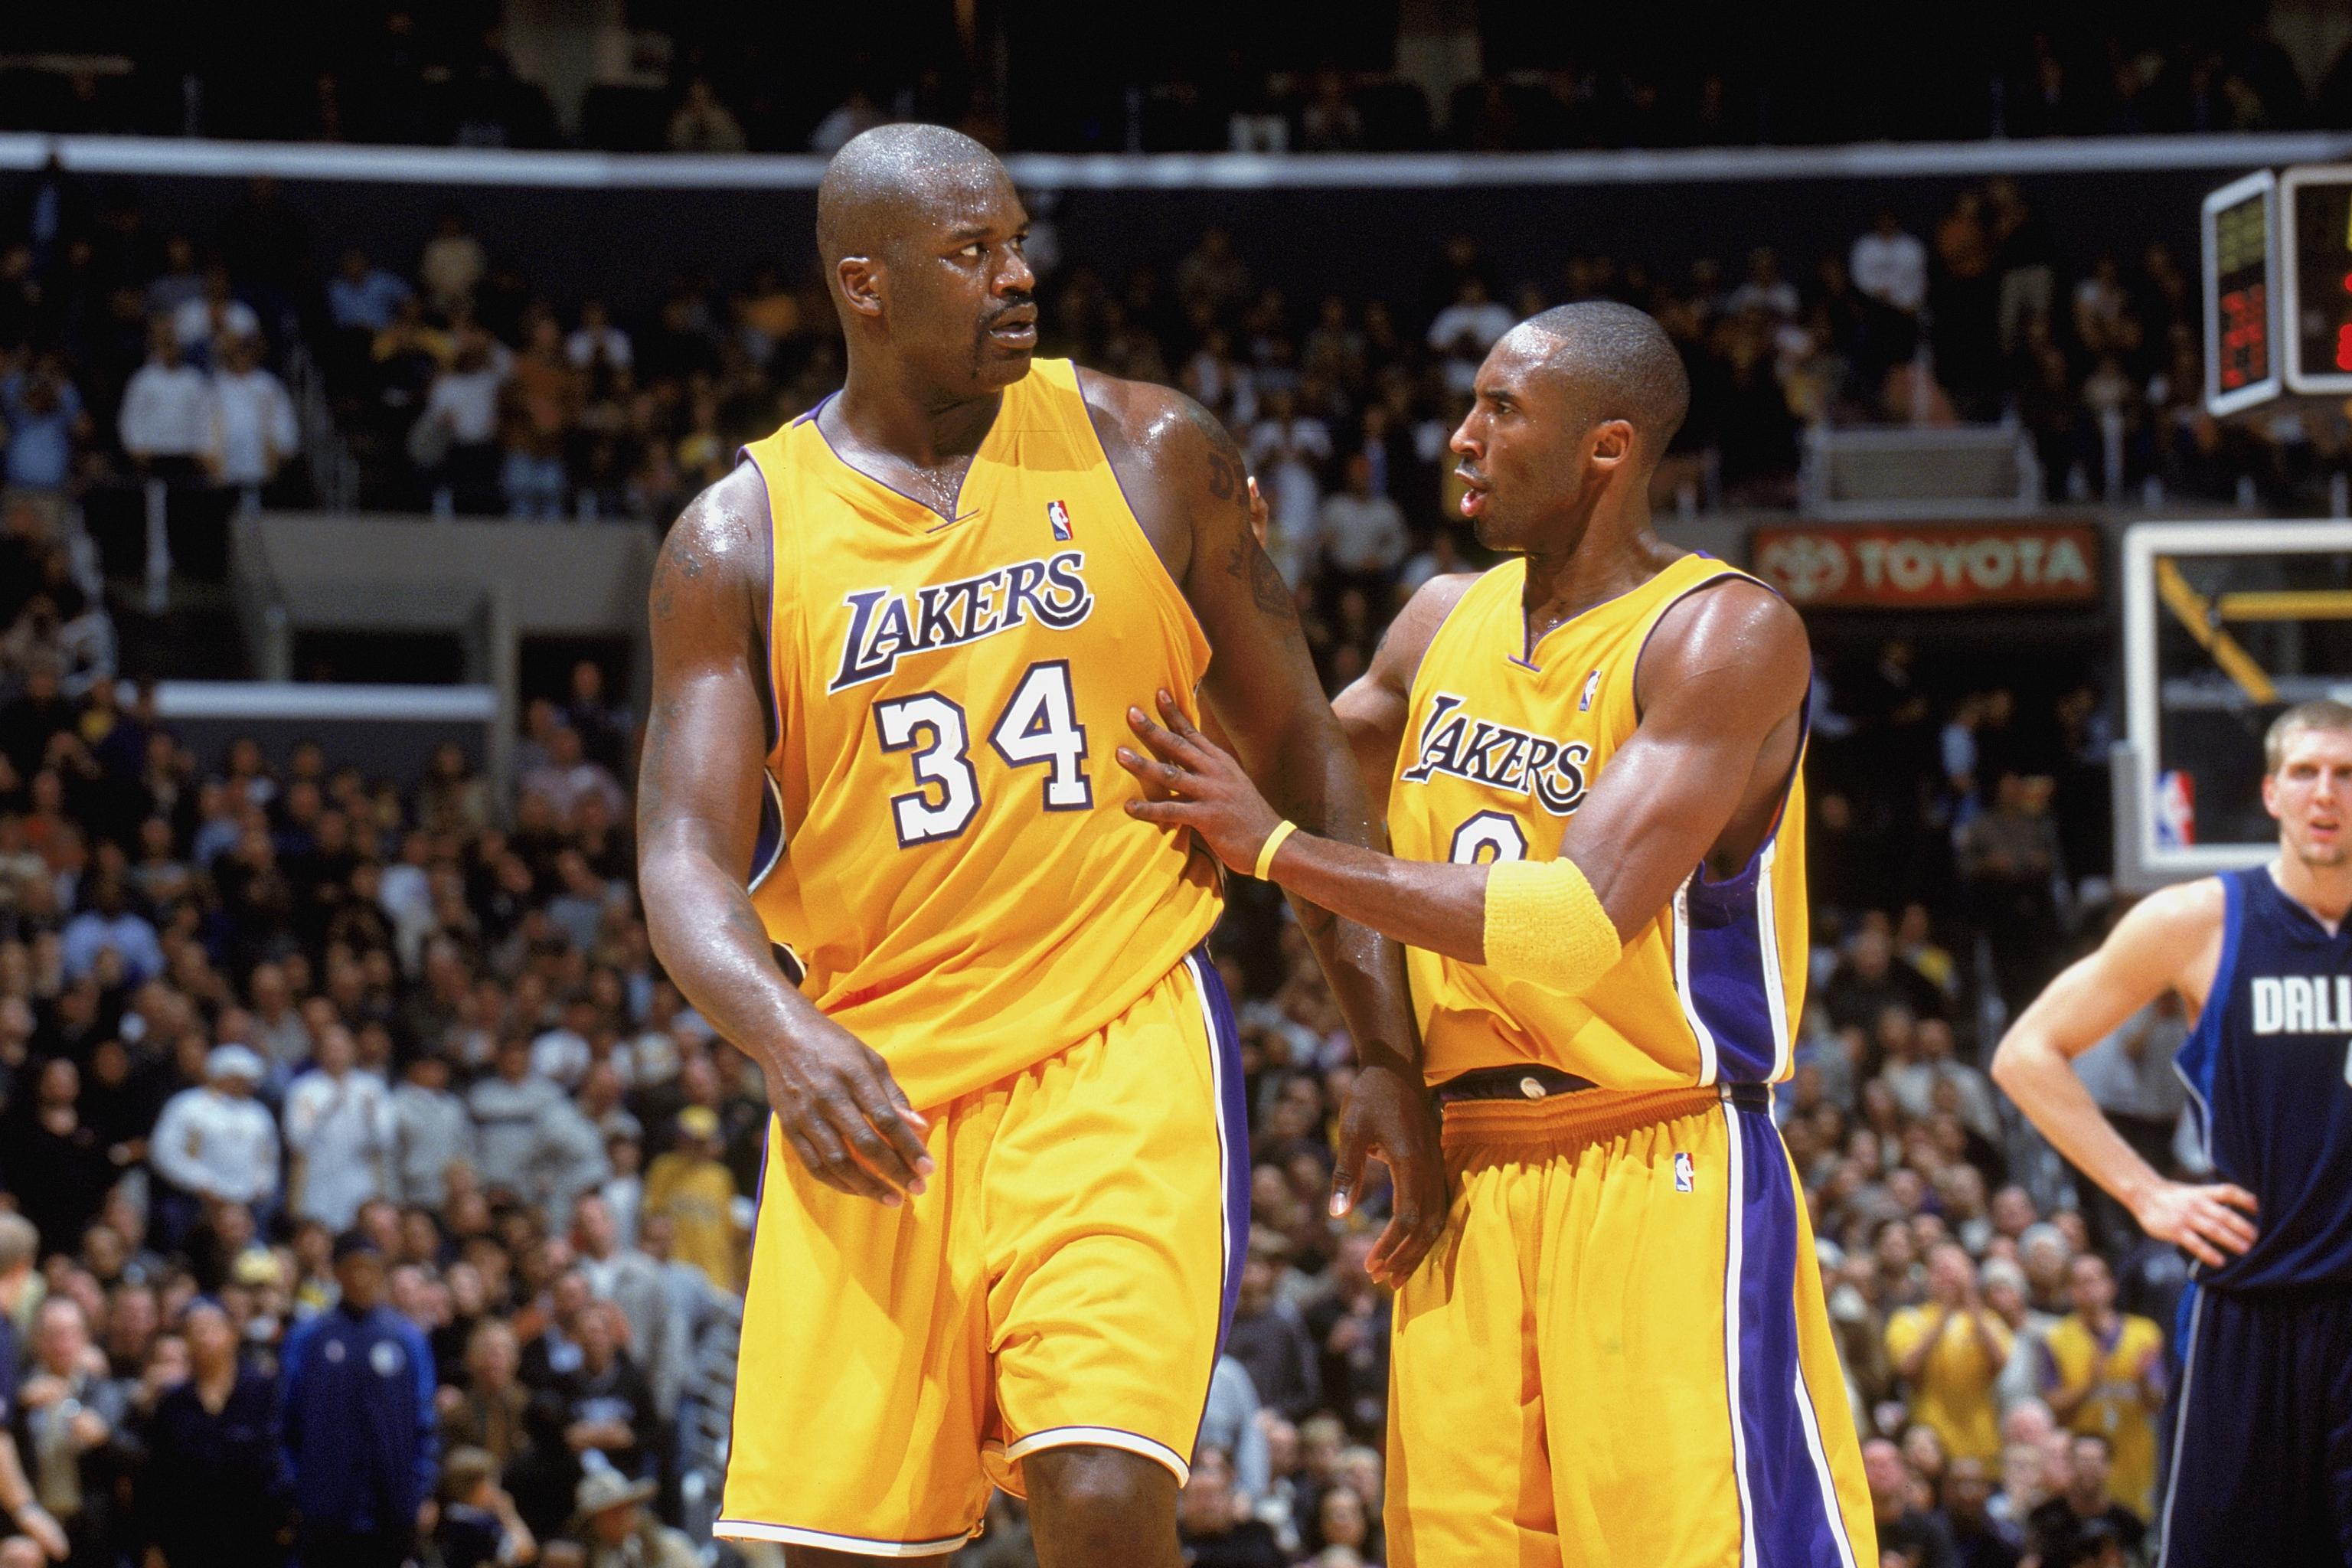 Lakers: What if Shaq and Kobe had their 'Last Dance' in L.A.